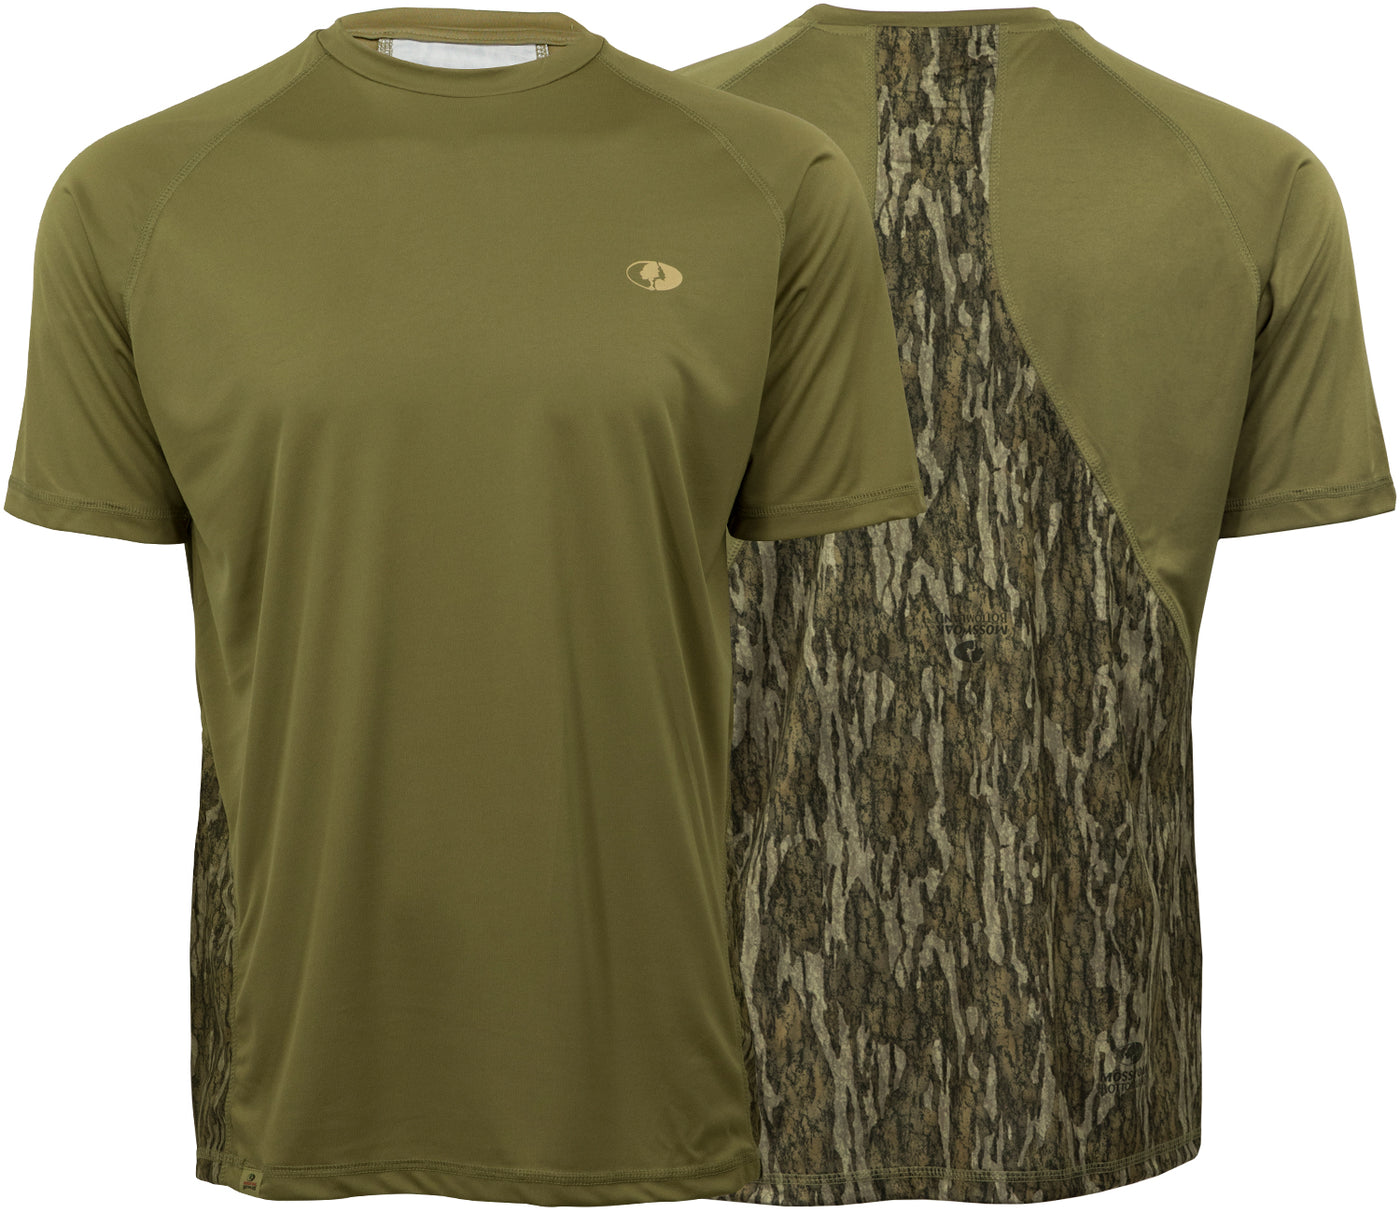 Mossy Oak Performance Field Short Sleeve Tech Tee Bark and Bottomland Front and Back